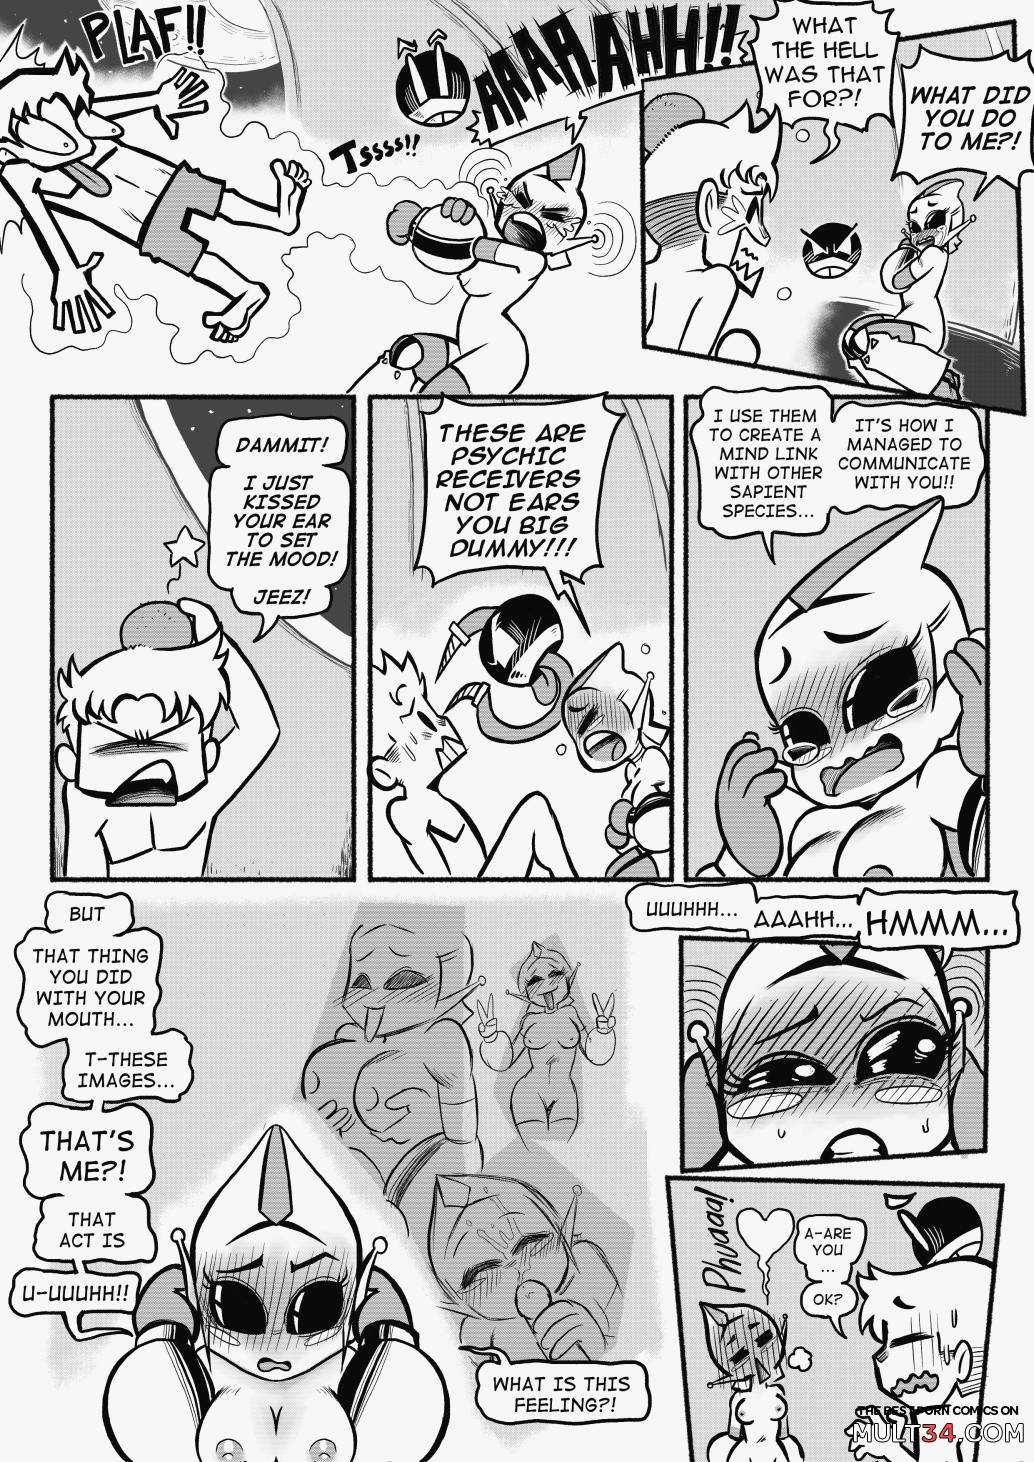 Abducted! - Mr.E page 15